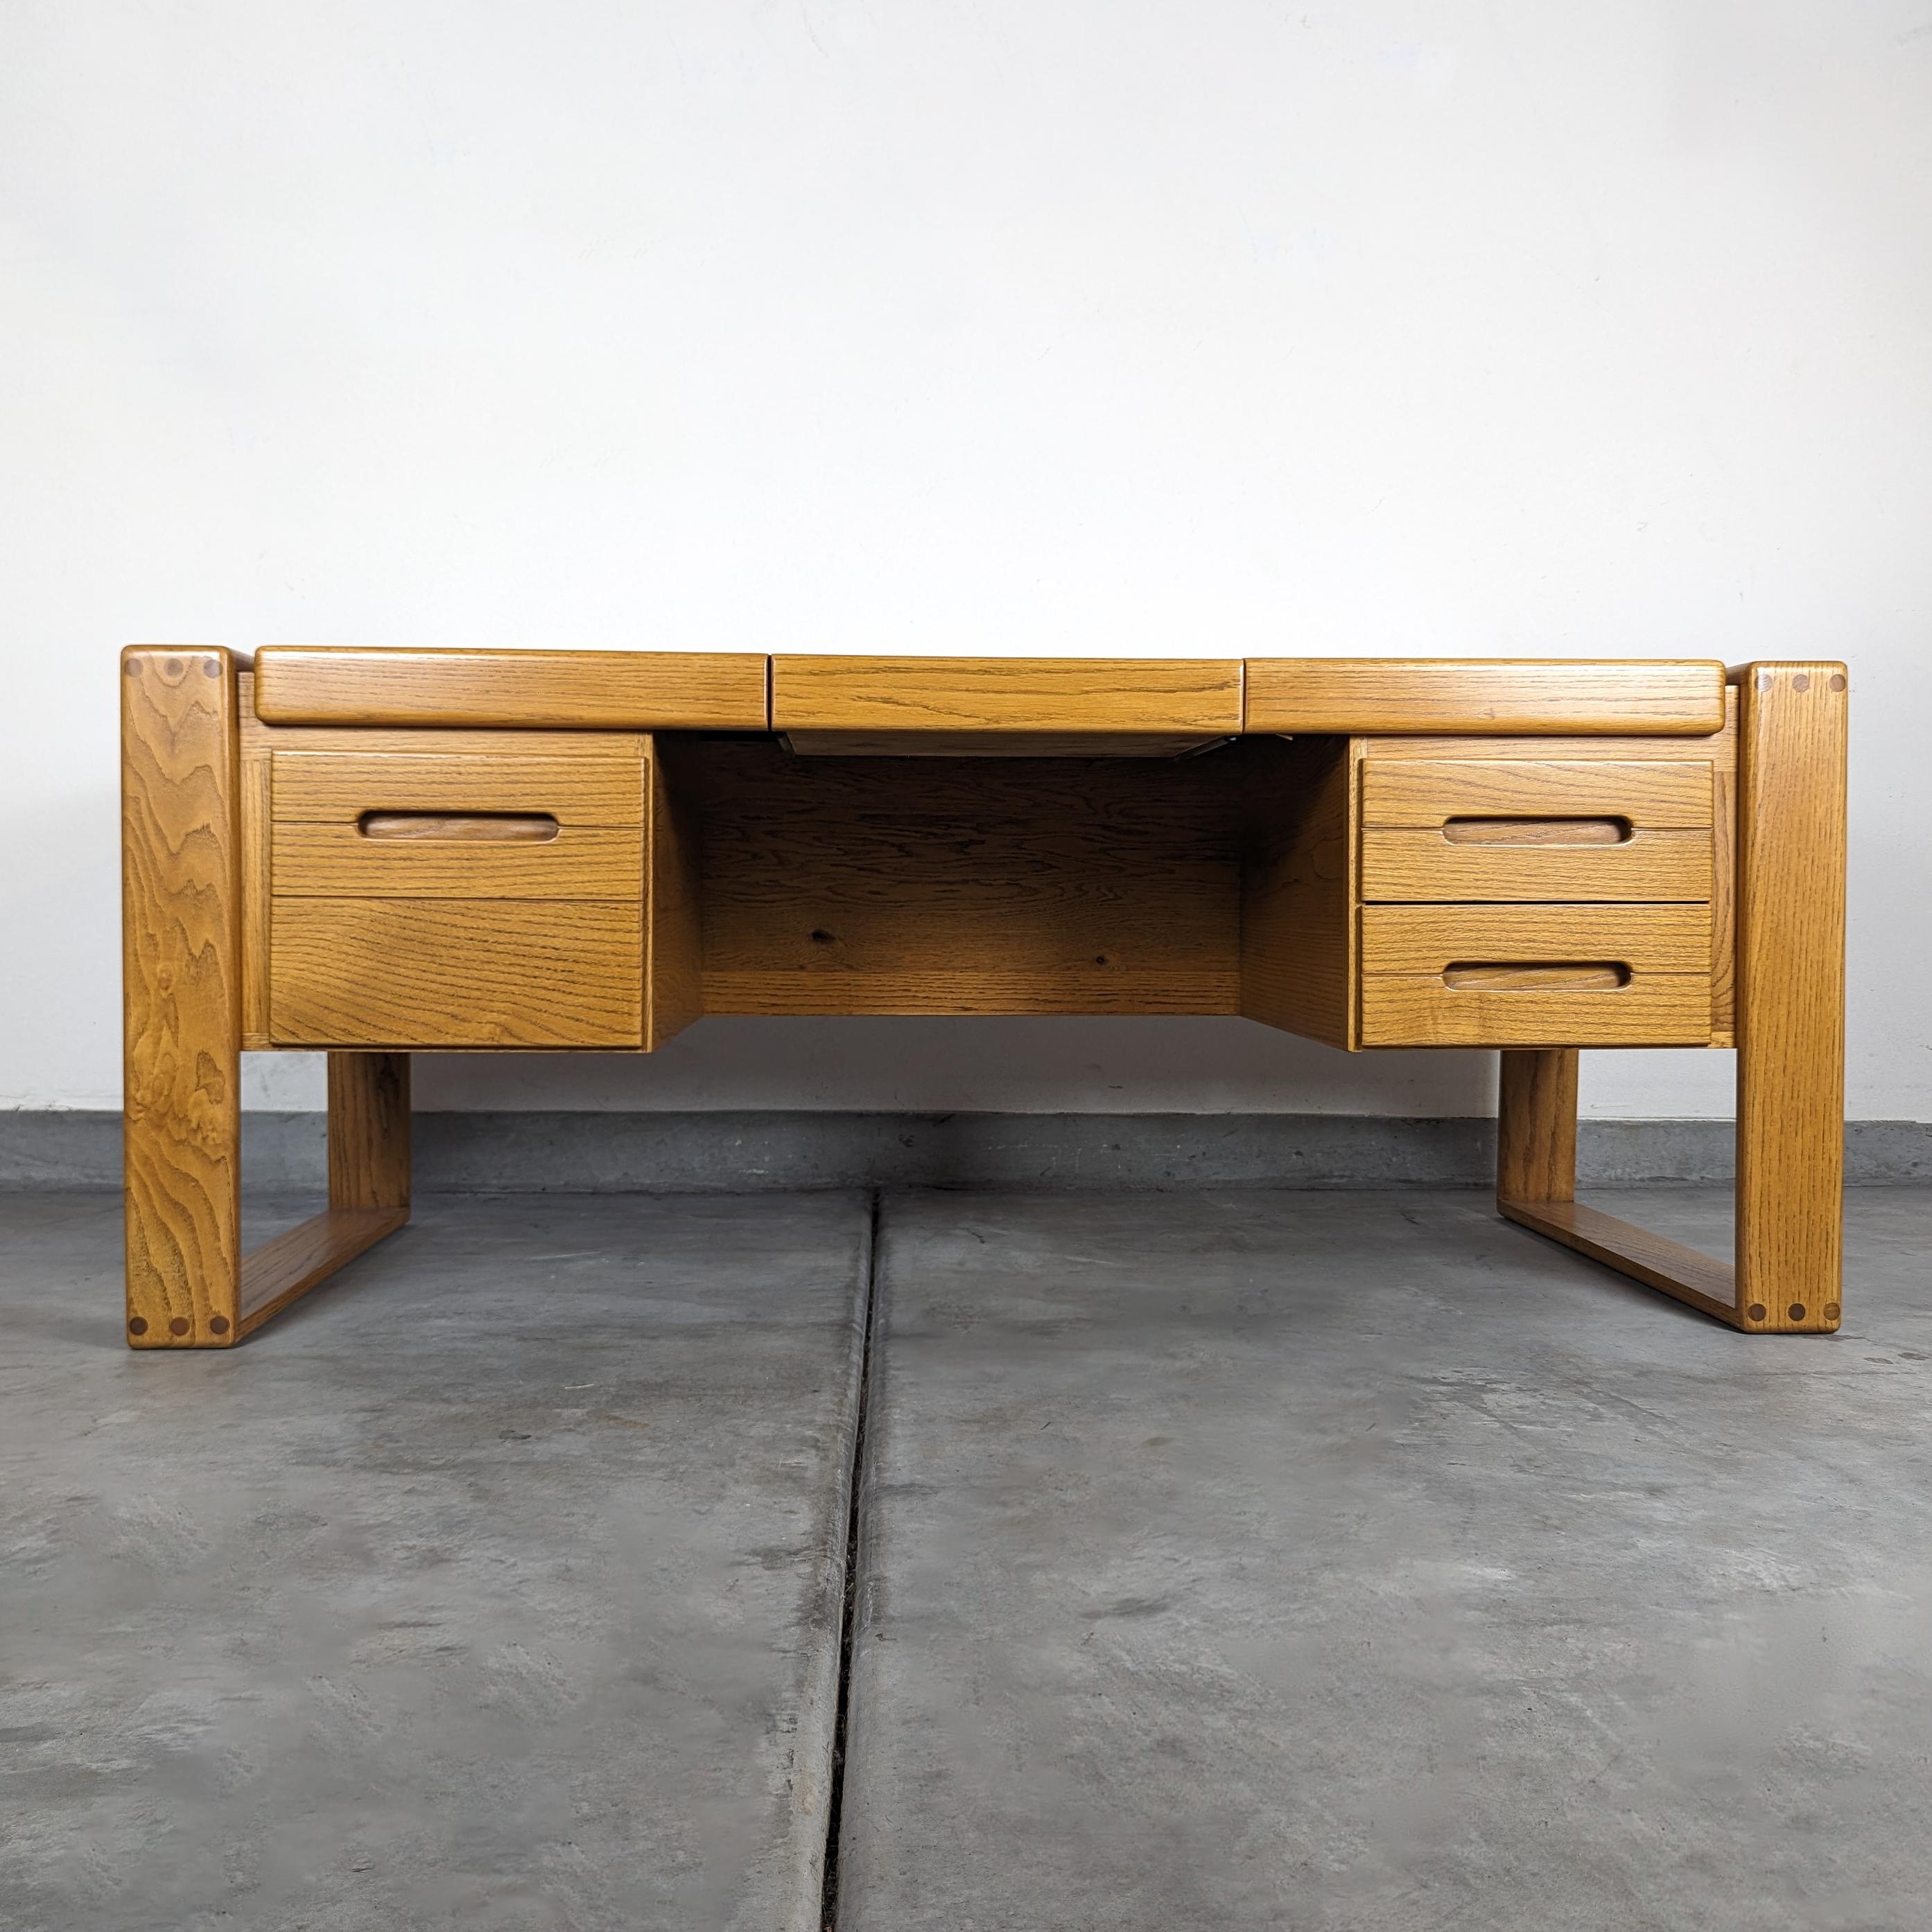 Mid-Century Modern Refinished Lou Hodges Handcrafted Oak Desk for California Design Group, c1980s For Sale